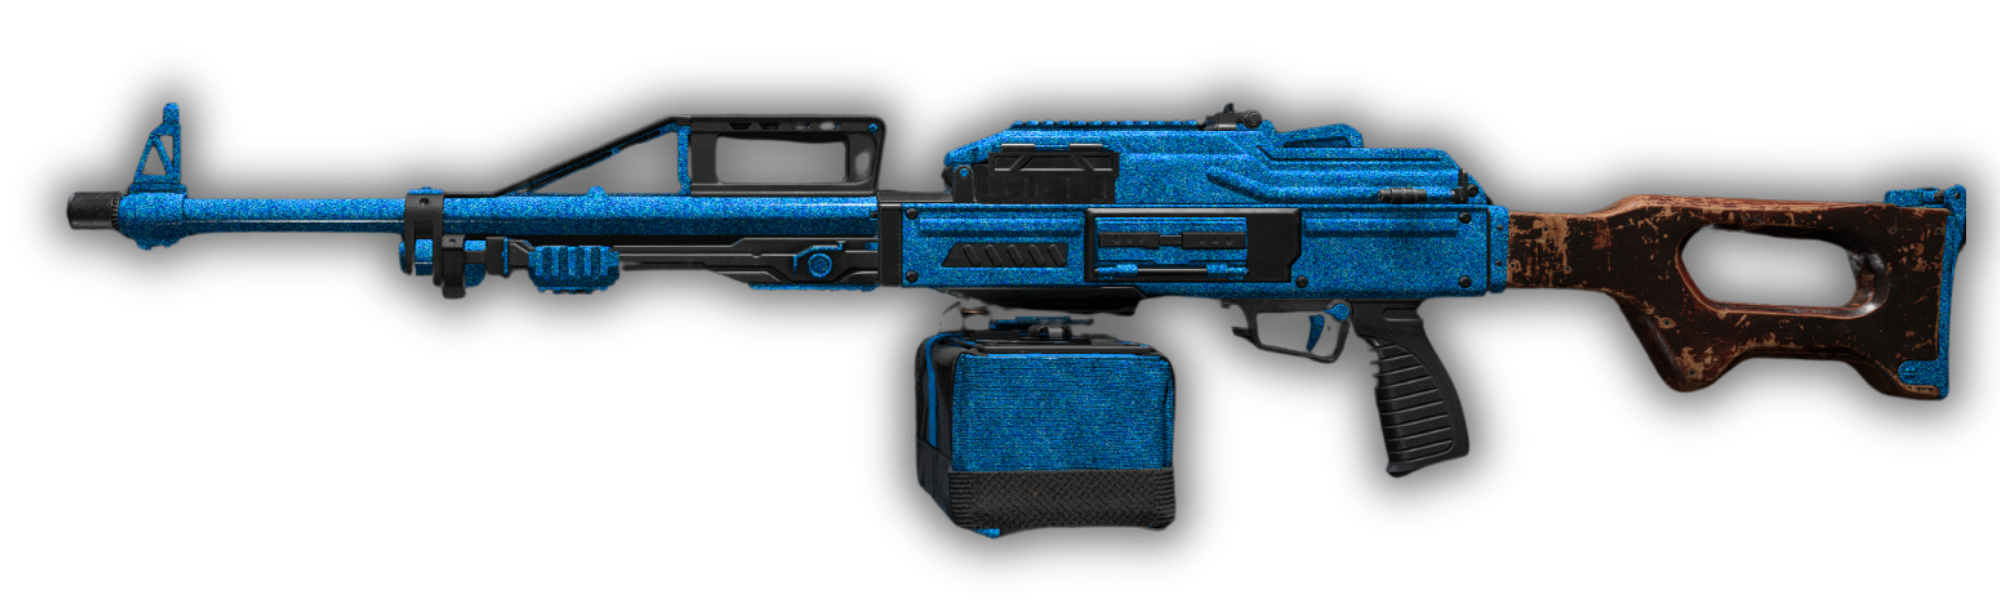 Pulemyot 762 Warzone Mobile